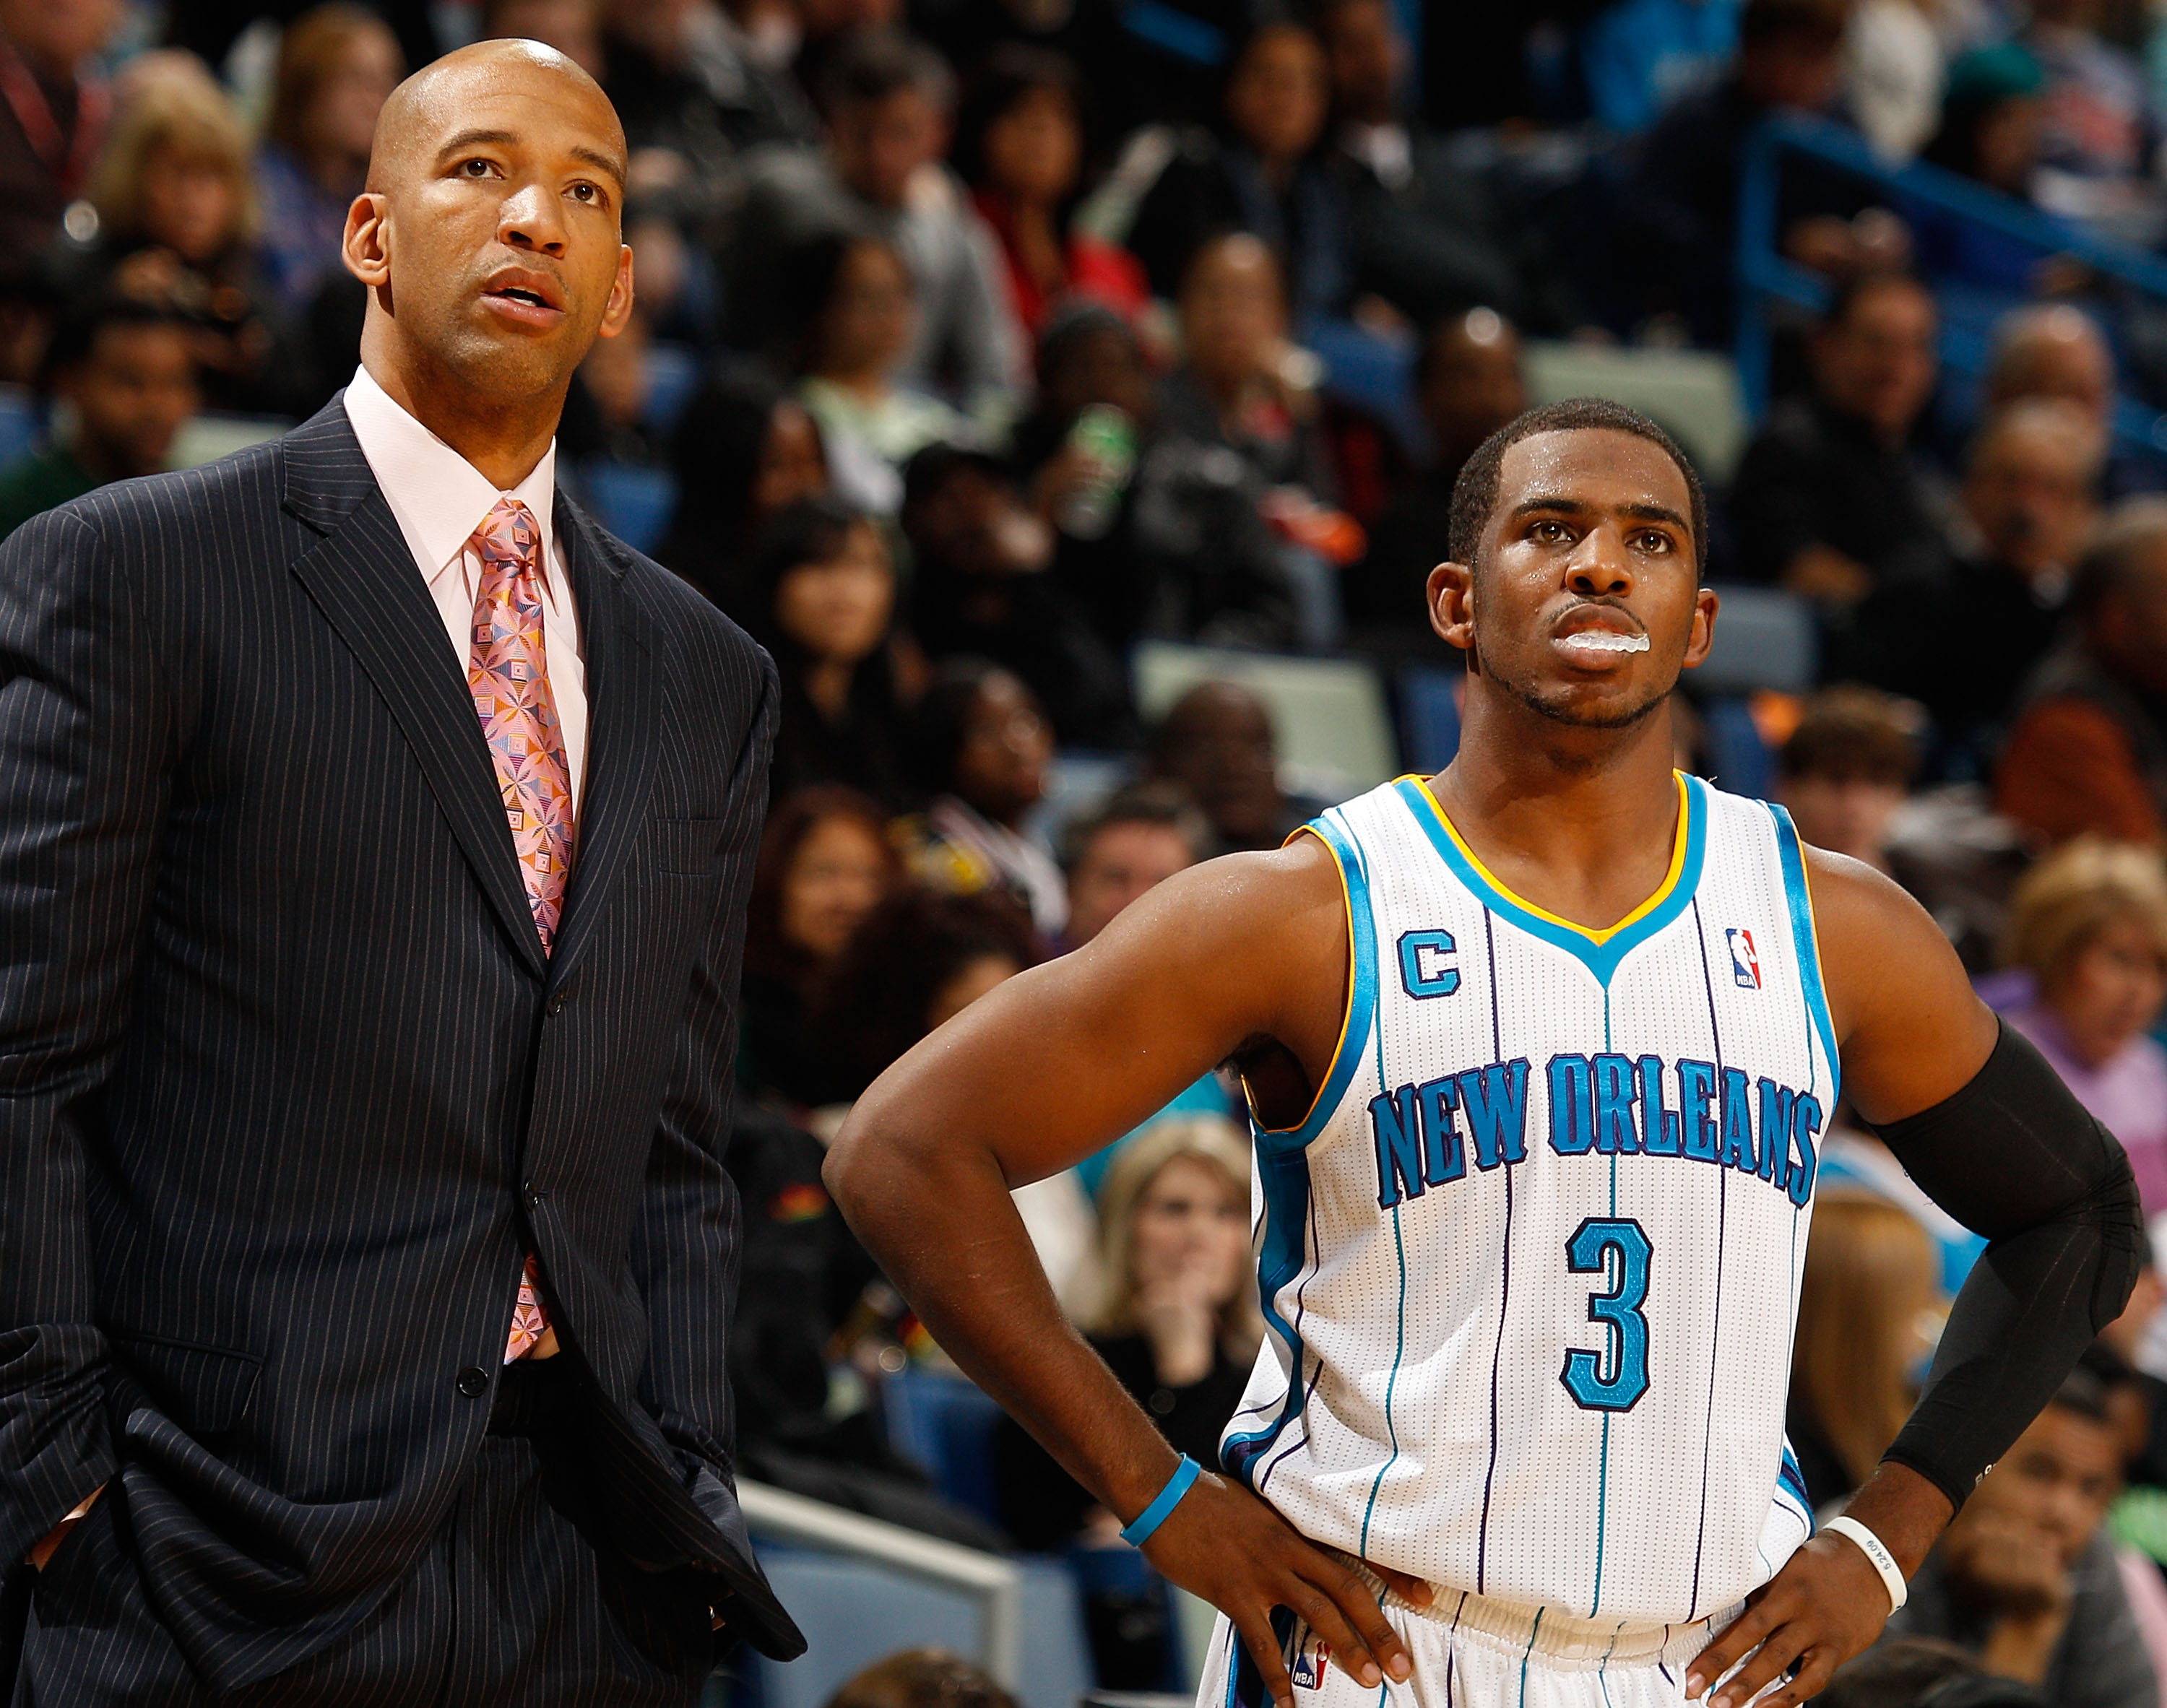 NEW ORLEANS, LA - DECEMBER 26:  Head coach Monty Williams talks with Chris Paul #3 of the New Orleans Hornets during the game against the Atlanta Hawks at the New Orleans Arena on December 26, 2010 in New Orleans, Louisiana.  NOTE TO USER: User expressly